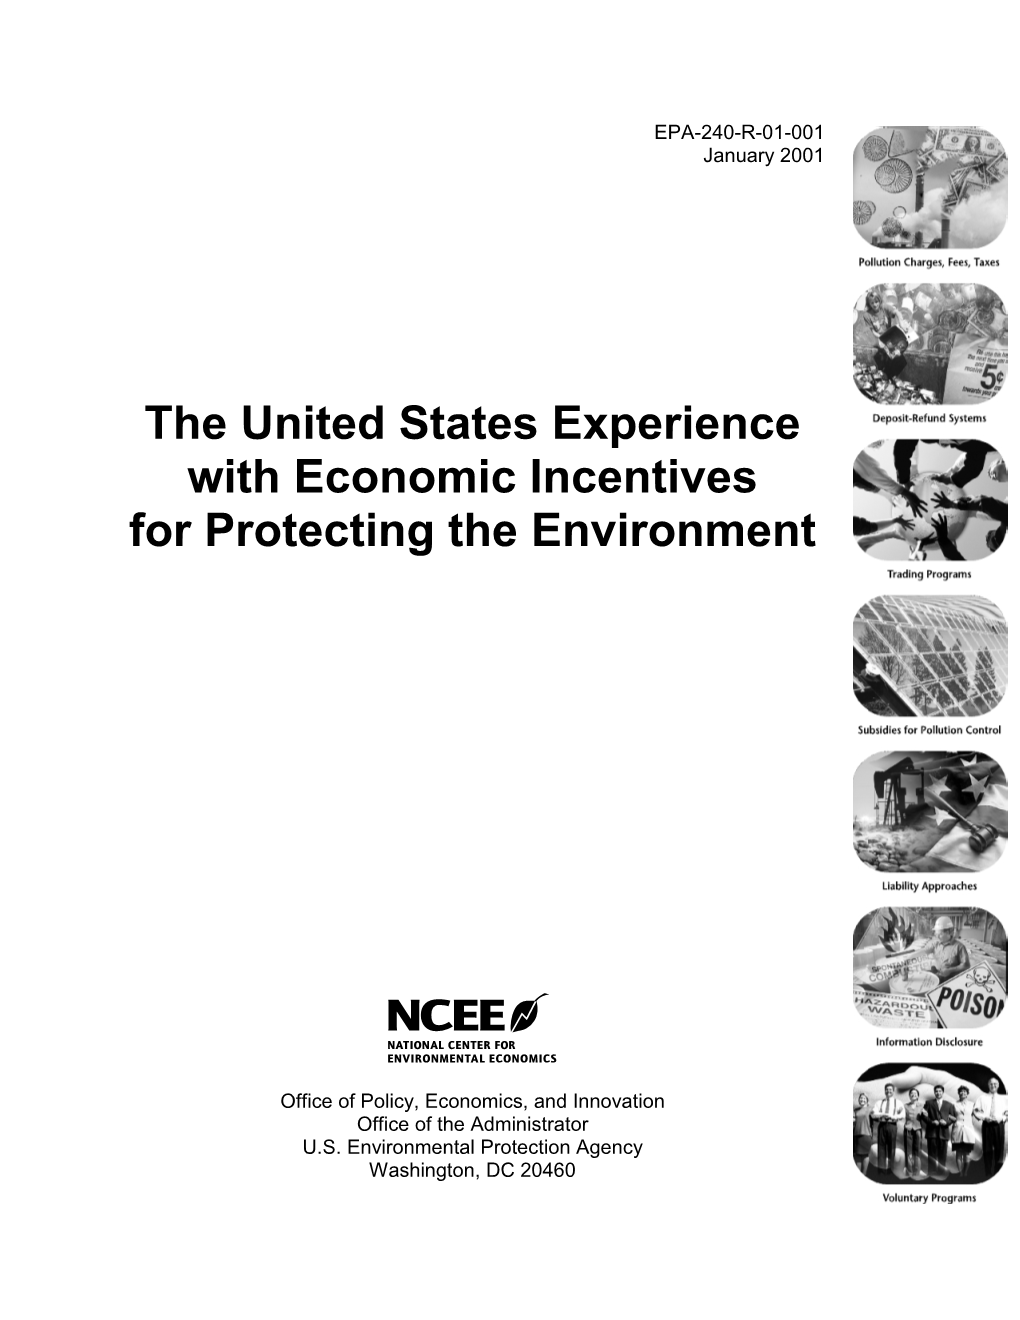 The United States Experience with Economic Incentives for Protecting the Environment